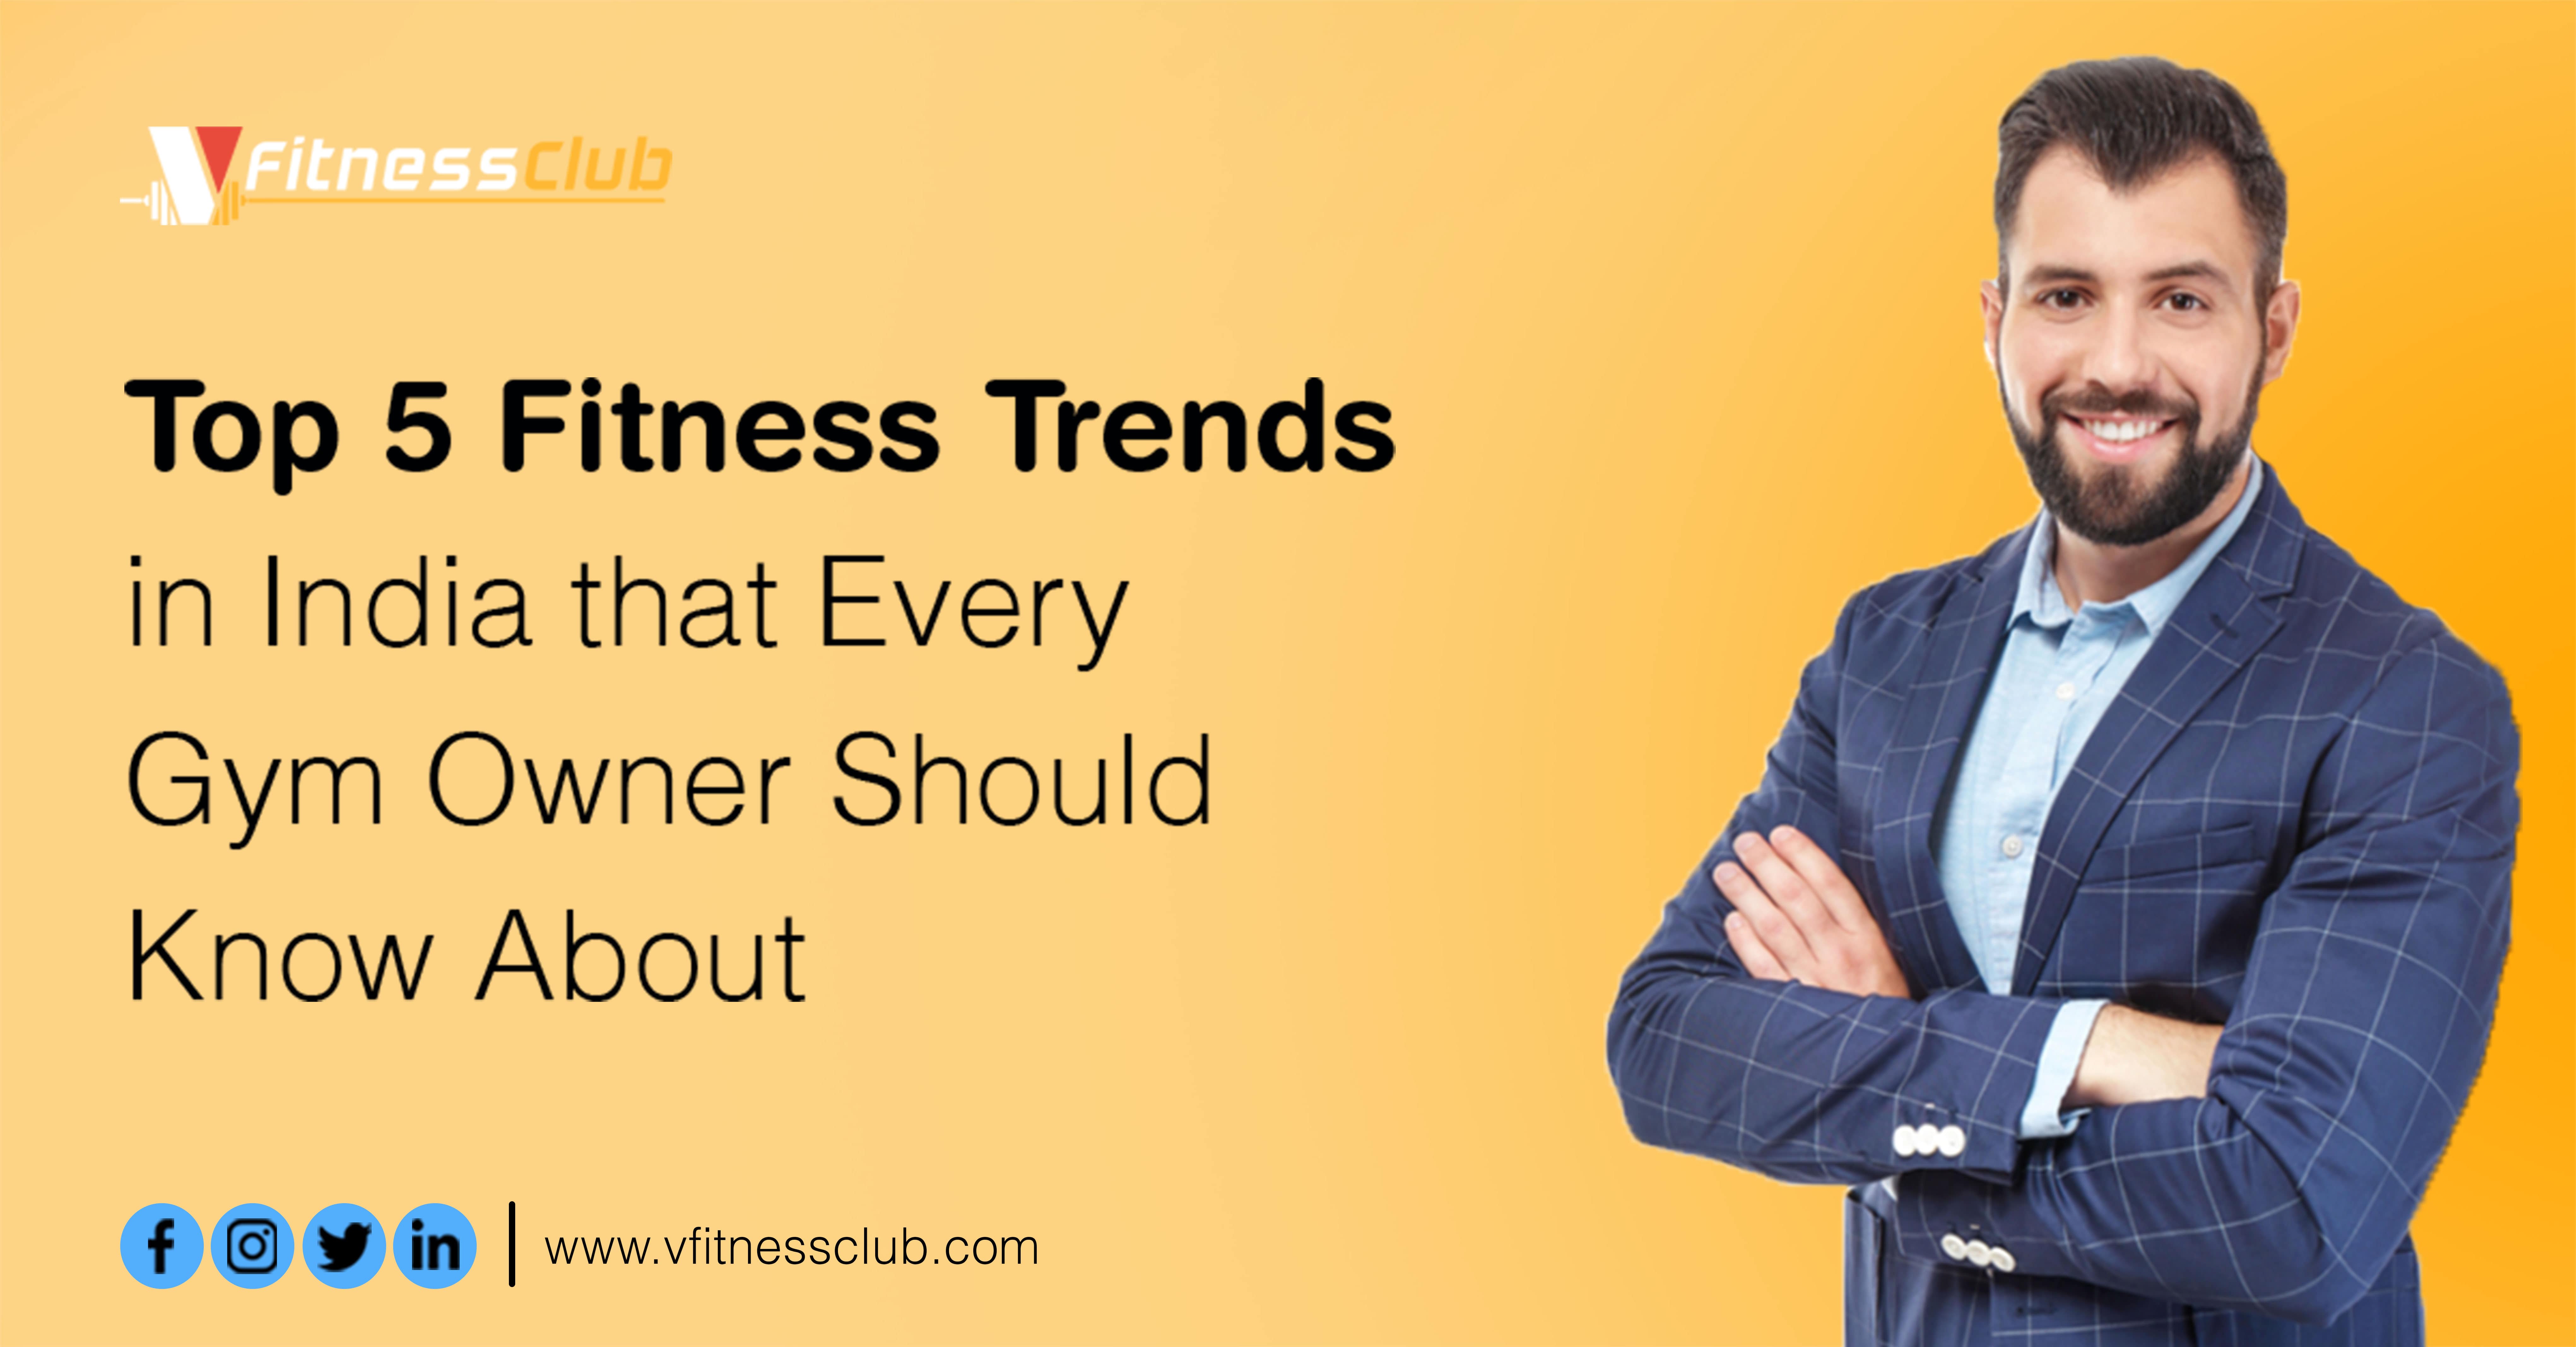 Top 5 Fitness Trends in India that Every Gym Owner Should Know About